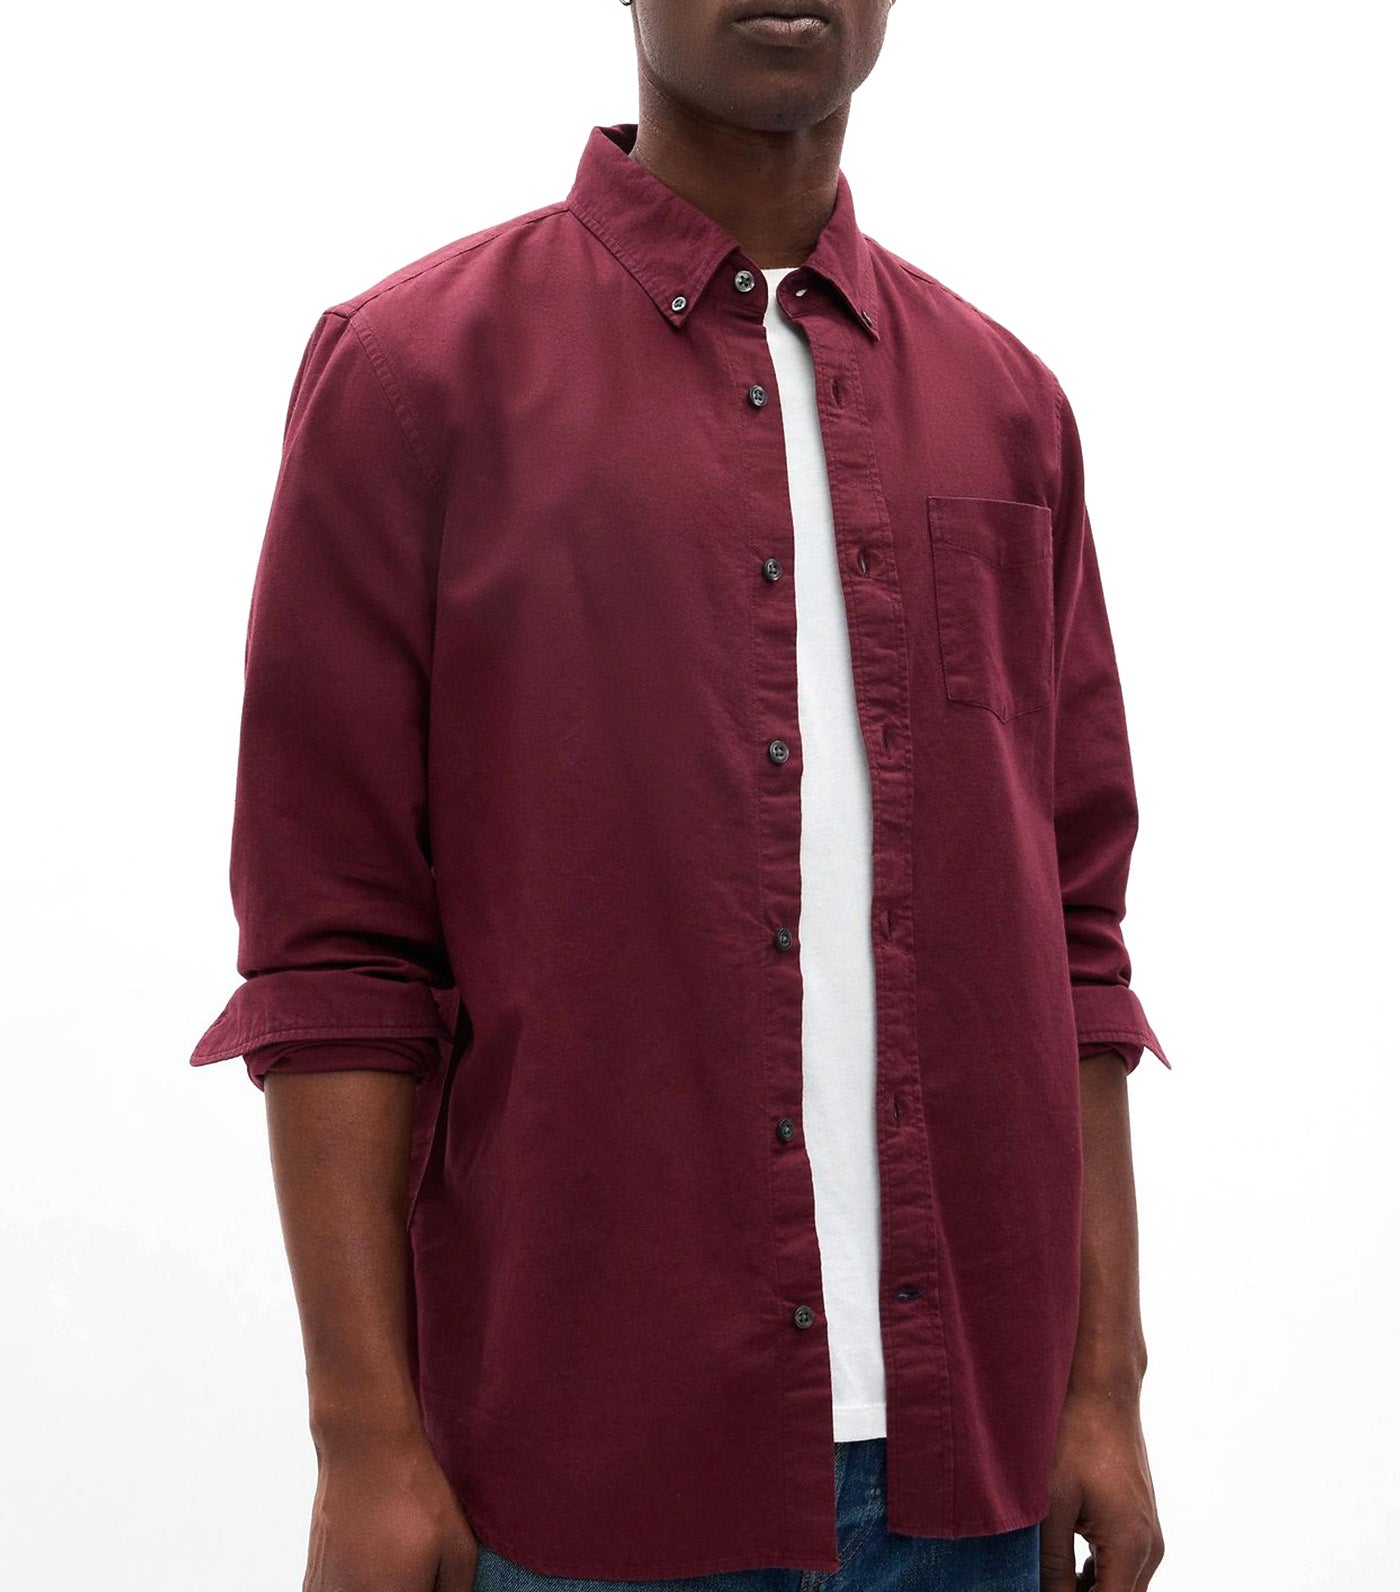 Oxford Shirt in Standard Fit Noir Red